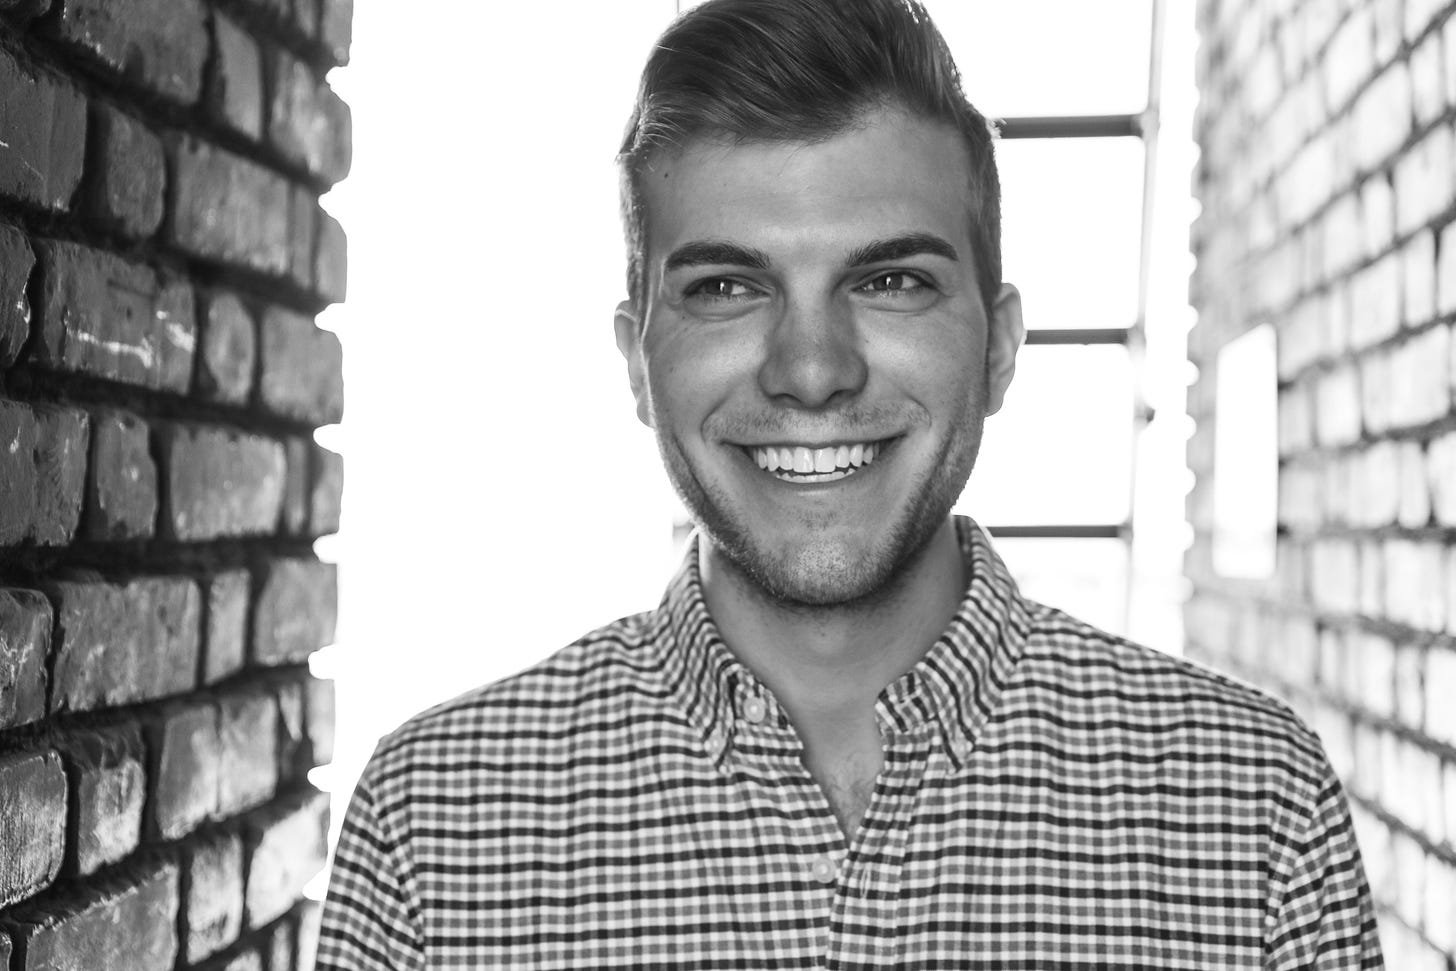 Black and white photo of Jeffrey Wisenbaugh, Director of Social & Content at Meta, standing in front of brick